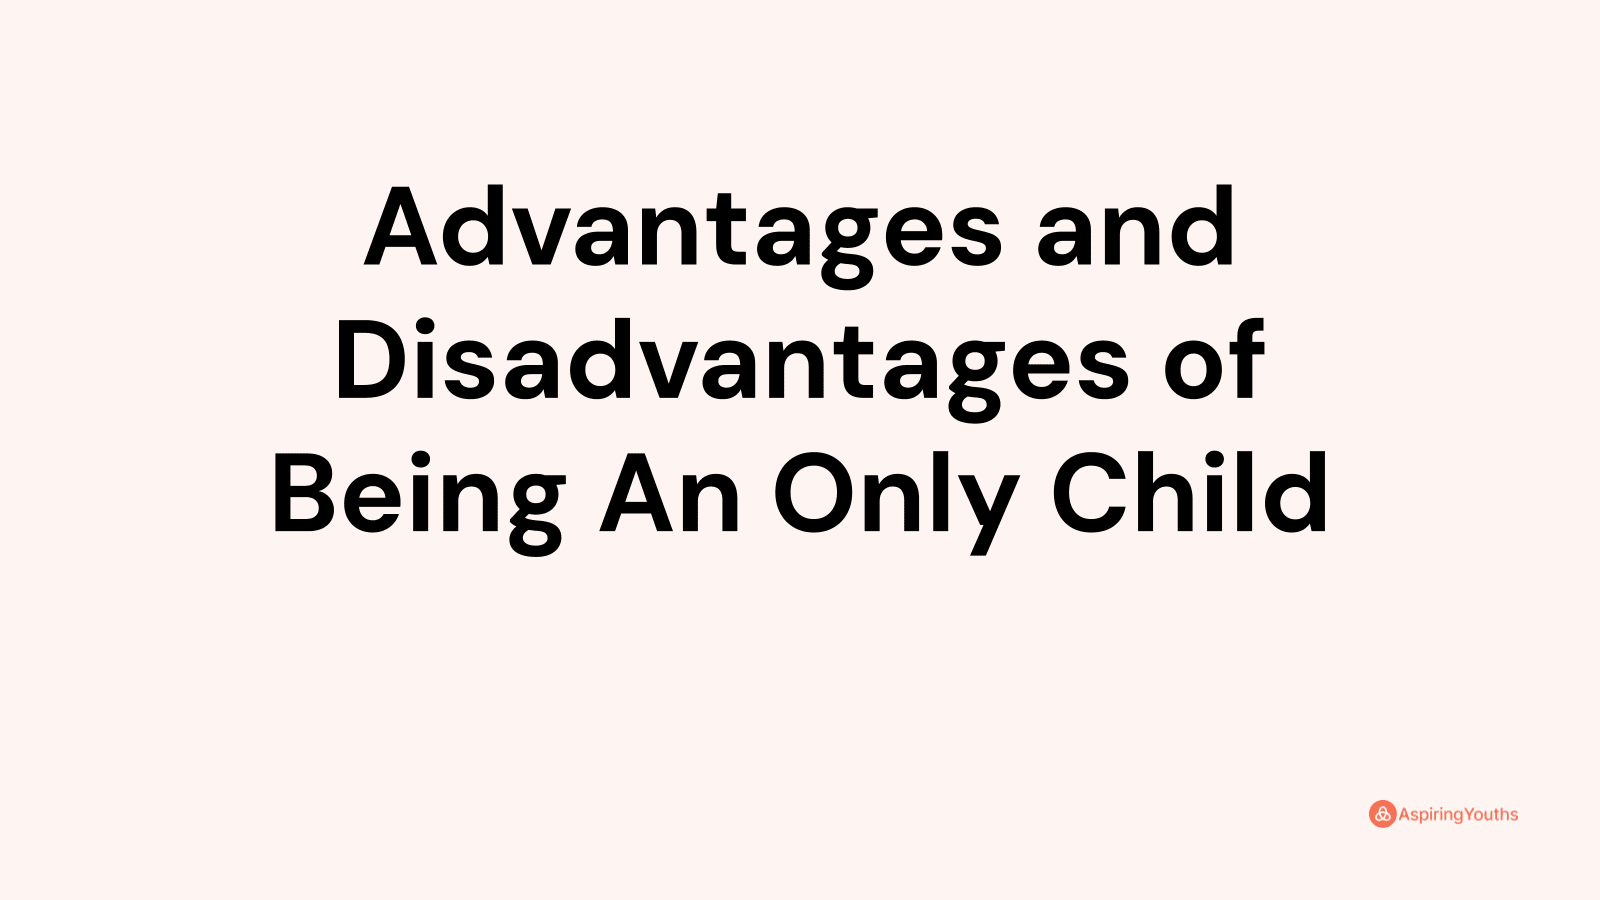 Advantages and disadvantages of Being An Only Child